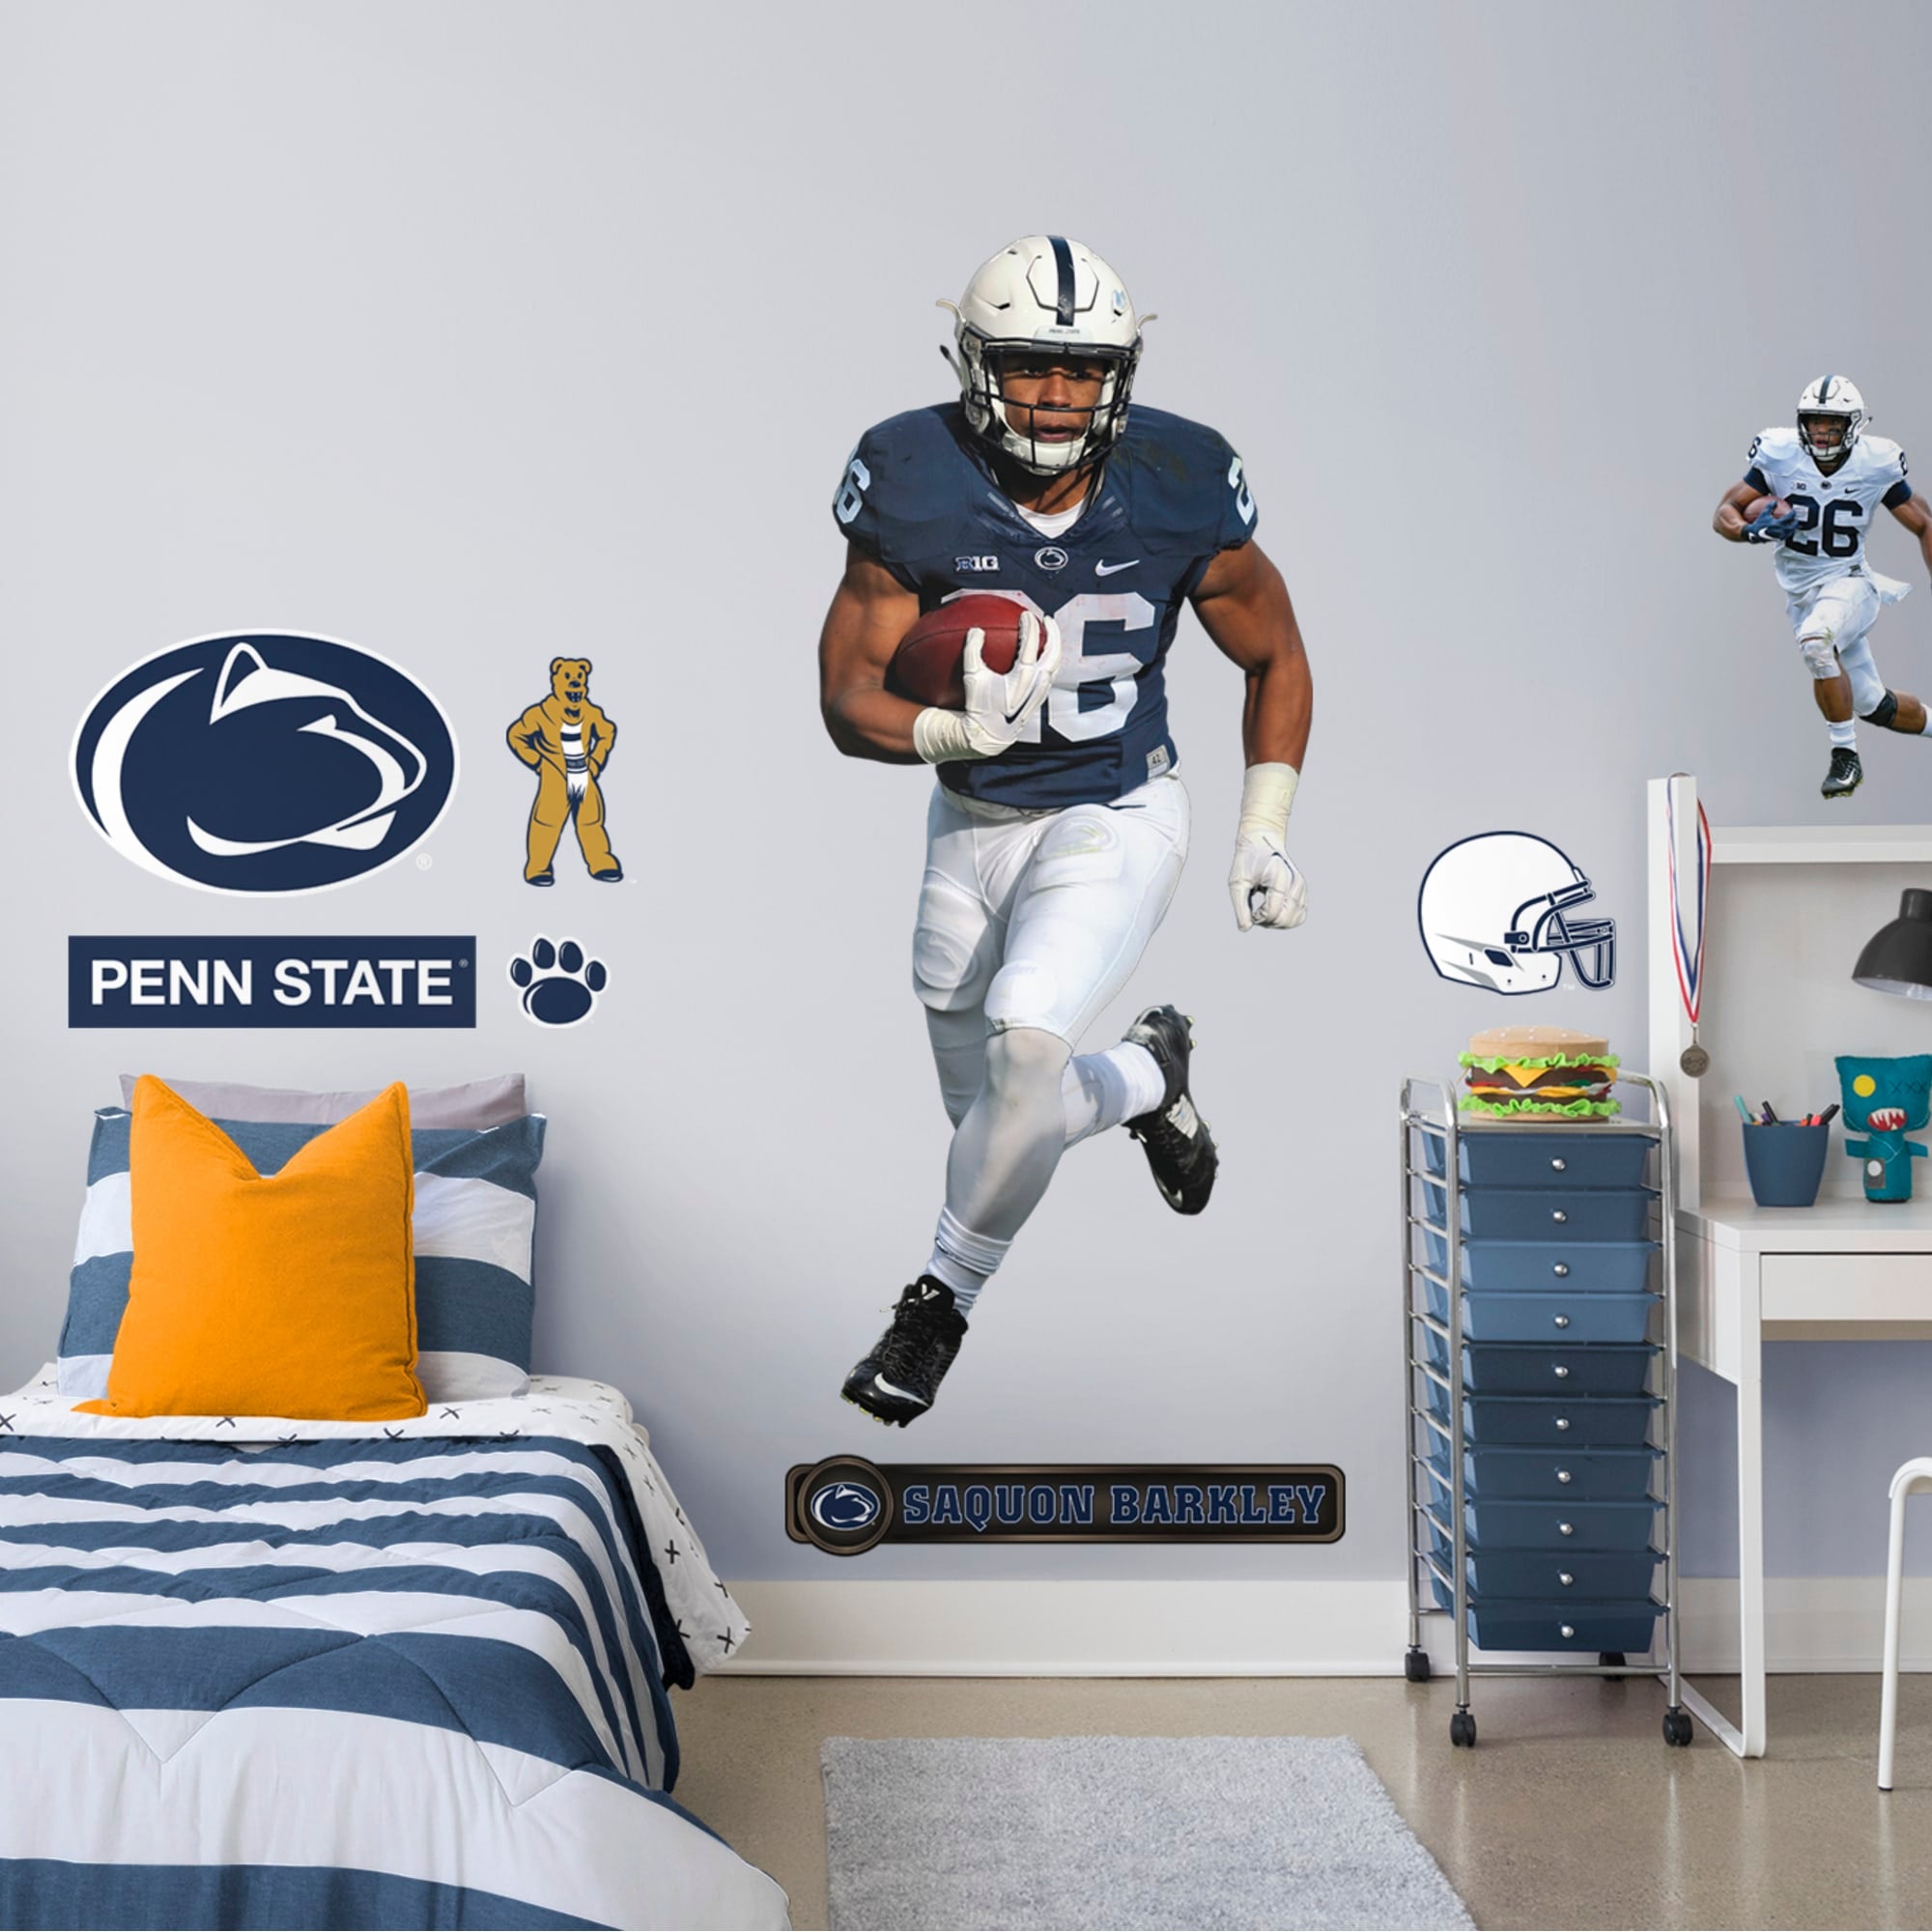 Saquon Barkley for Penn State Nittany Lions: Penn State - Officially Licensed Removable Wall Decal Life-Size Athlete + 8 Decals